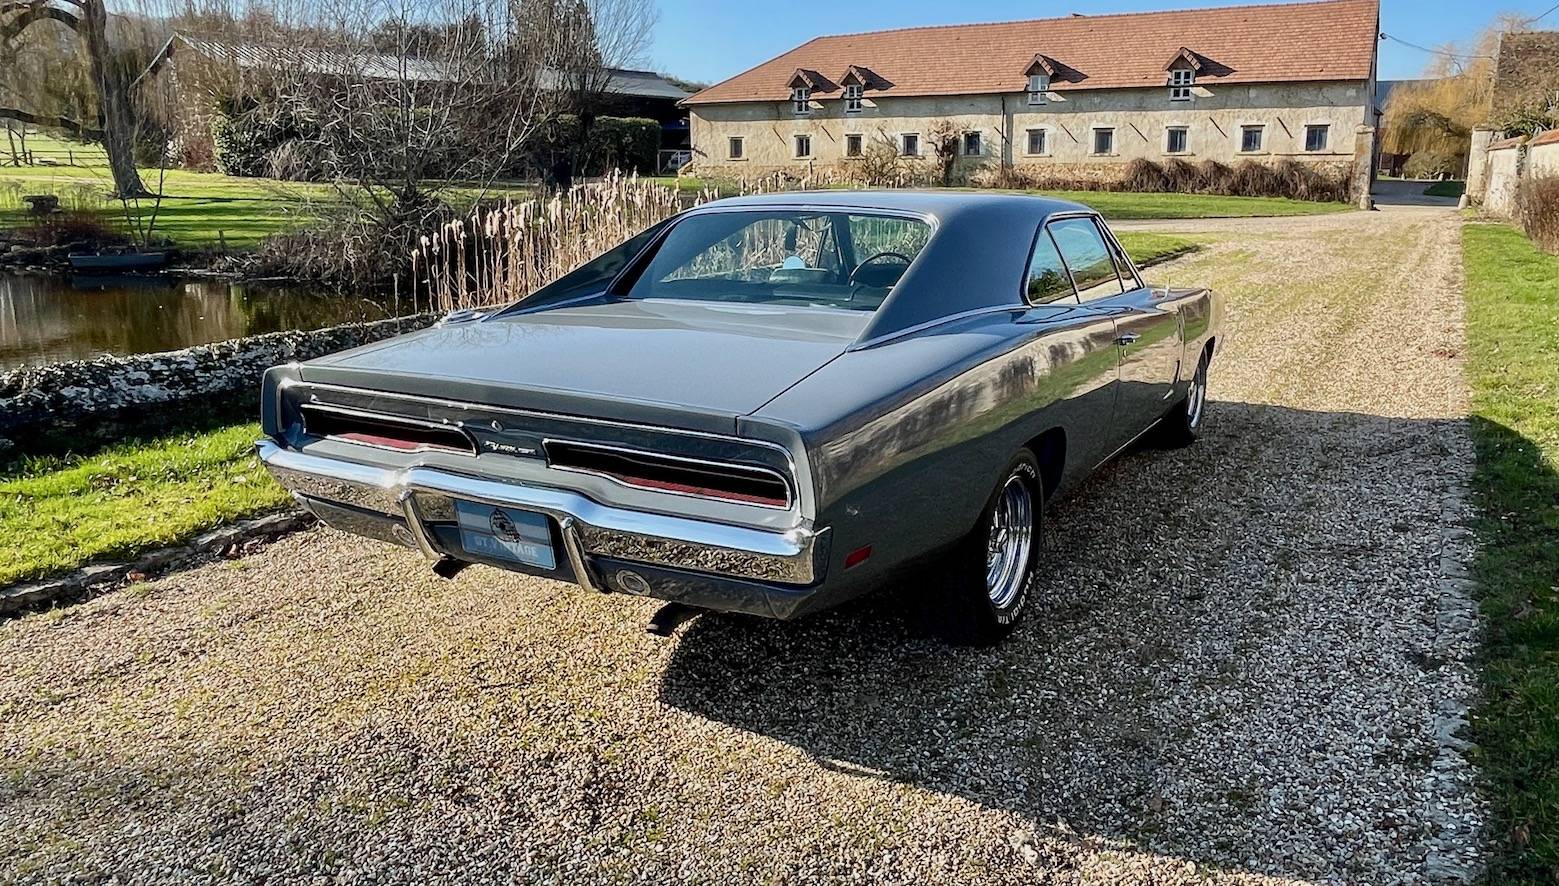 For Sale: Dodge Charger R/T 440 (1969) offered for £121,451